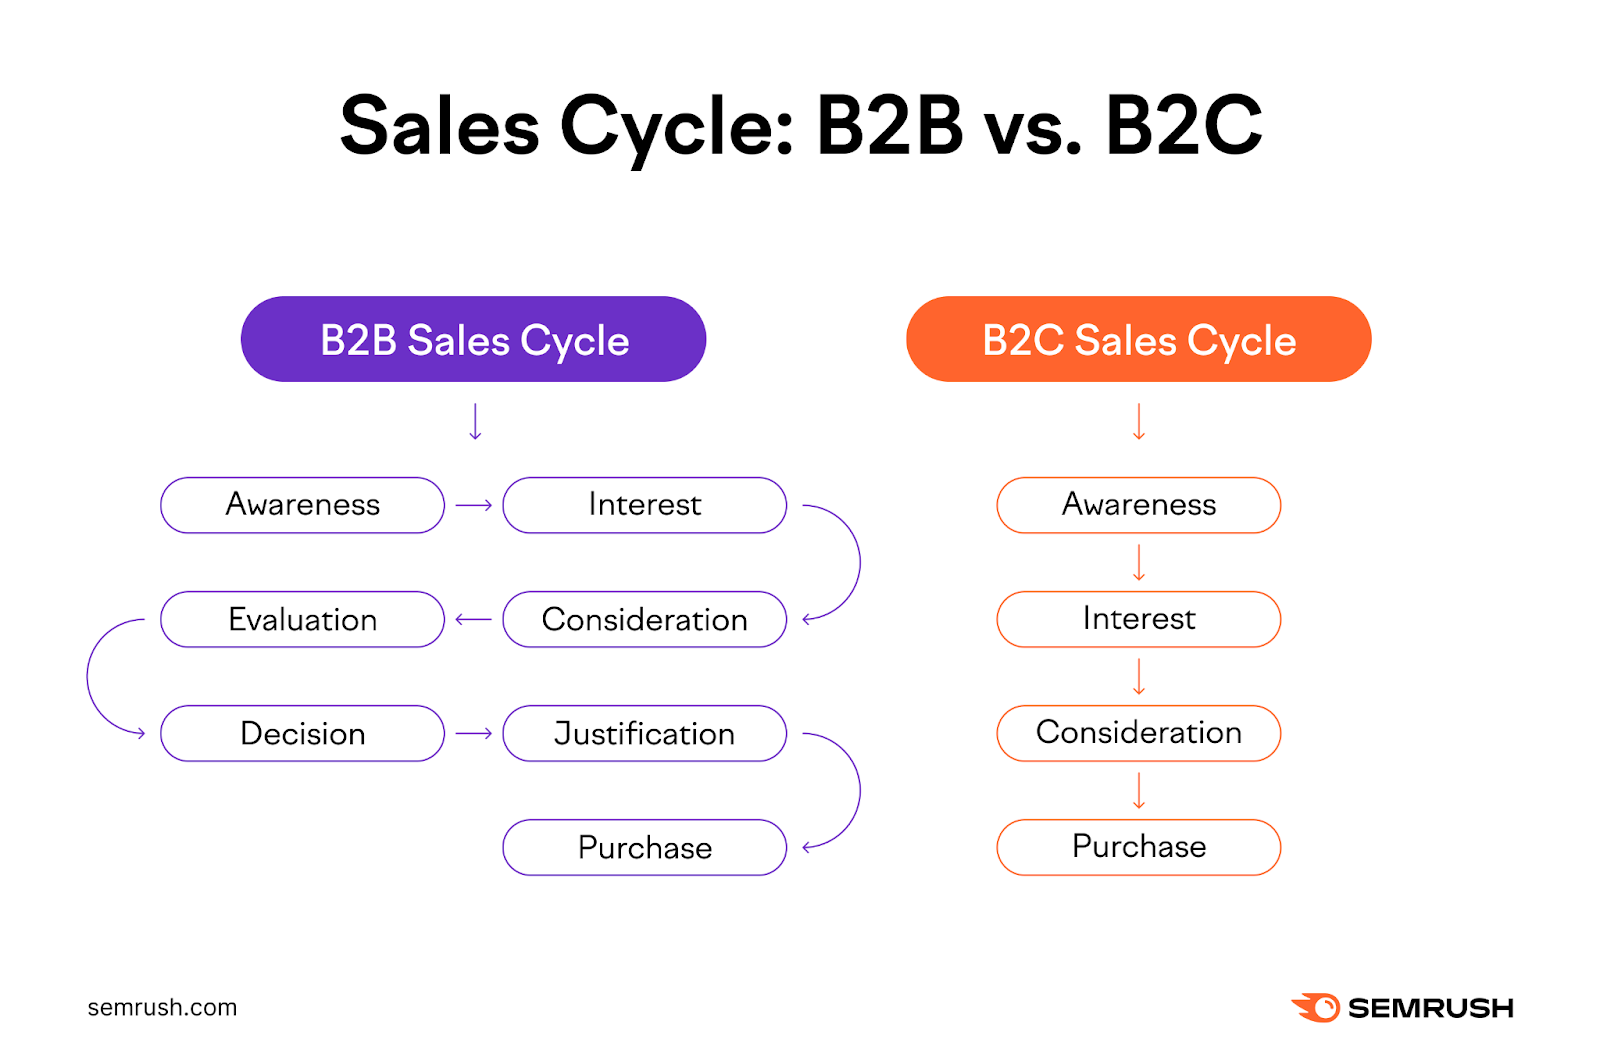 B2B sales cycle is awareness, interest, evaluation, consideration, decision, justification, purchase. B2C sales cycle is awareness, interest, consideration, purchase.